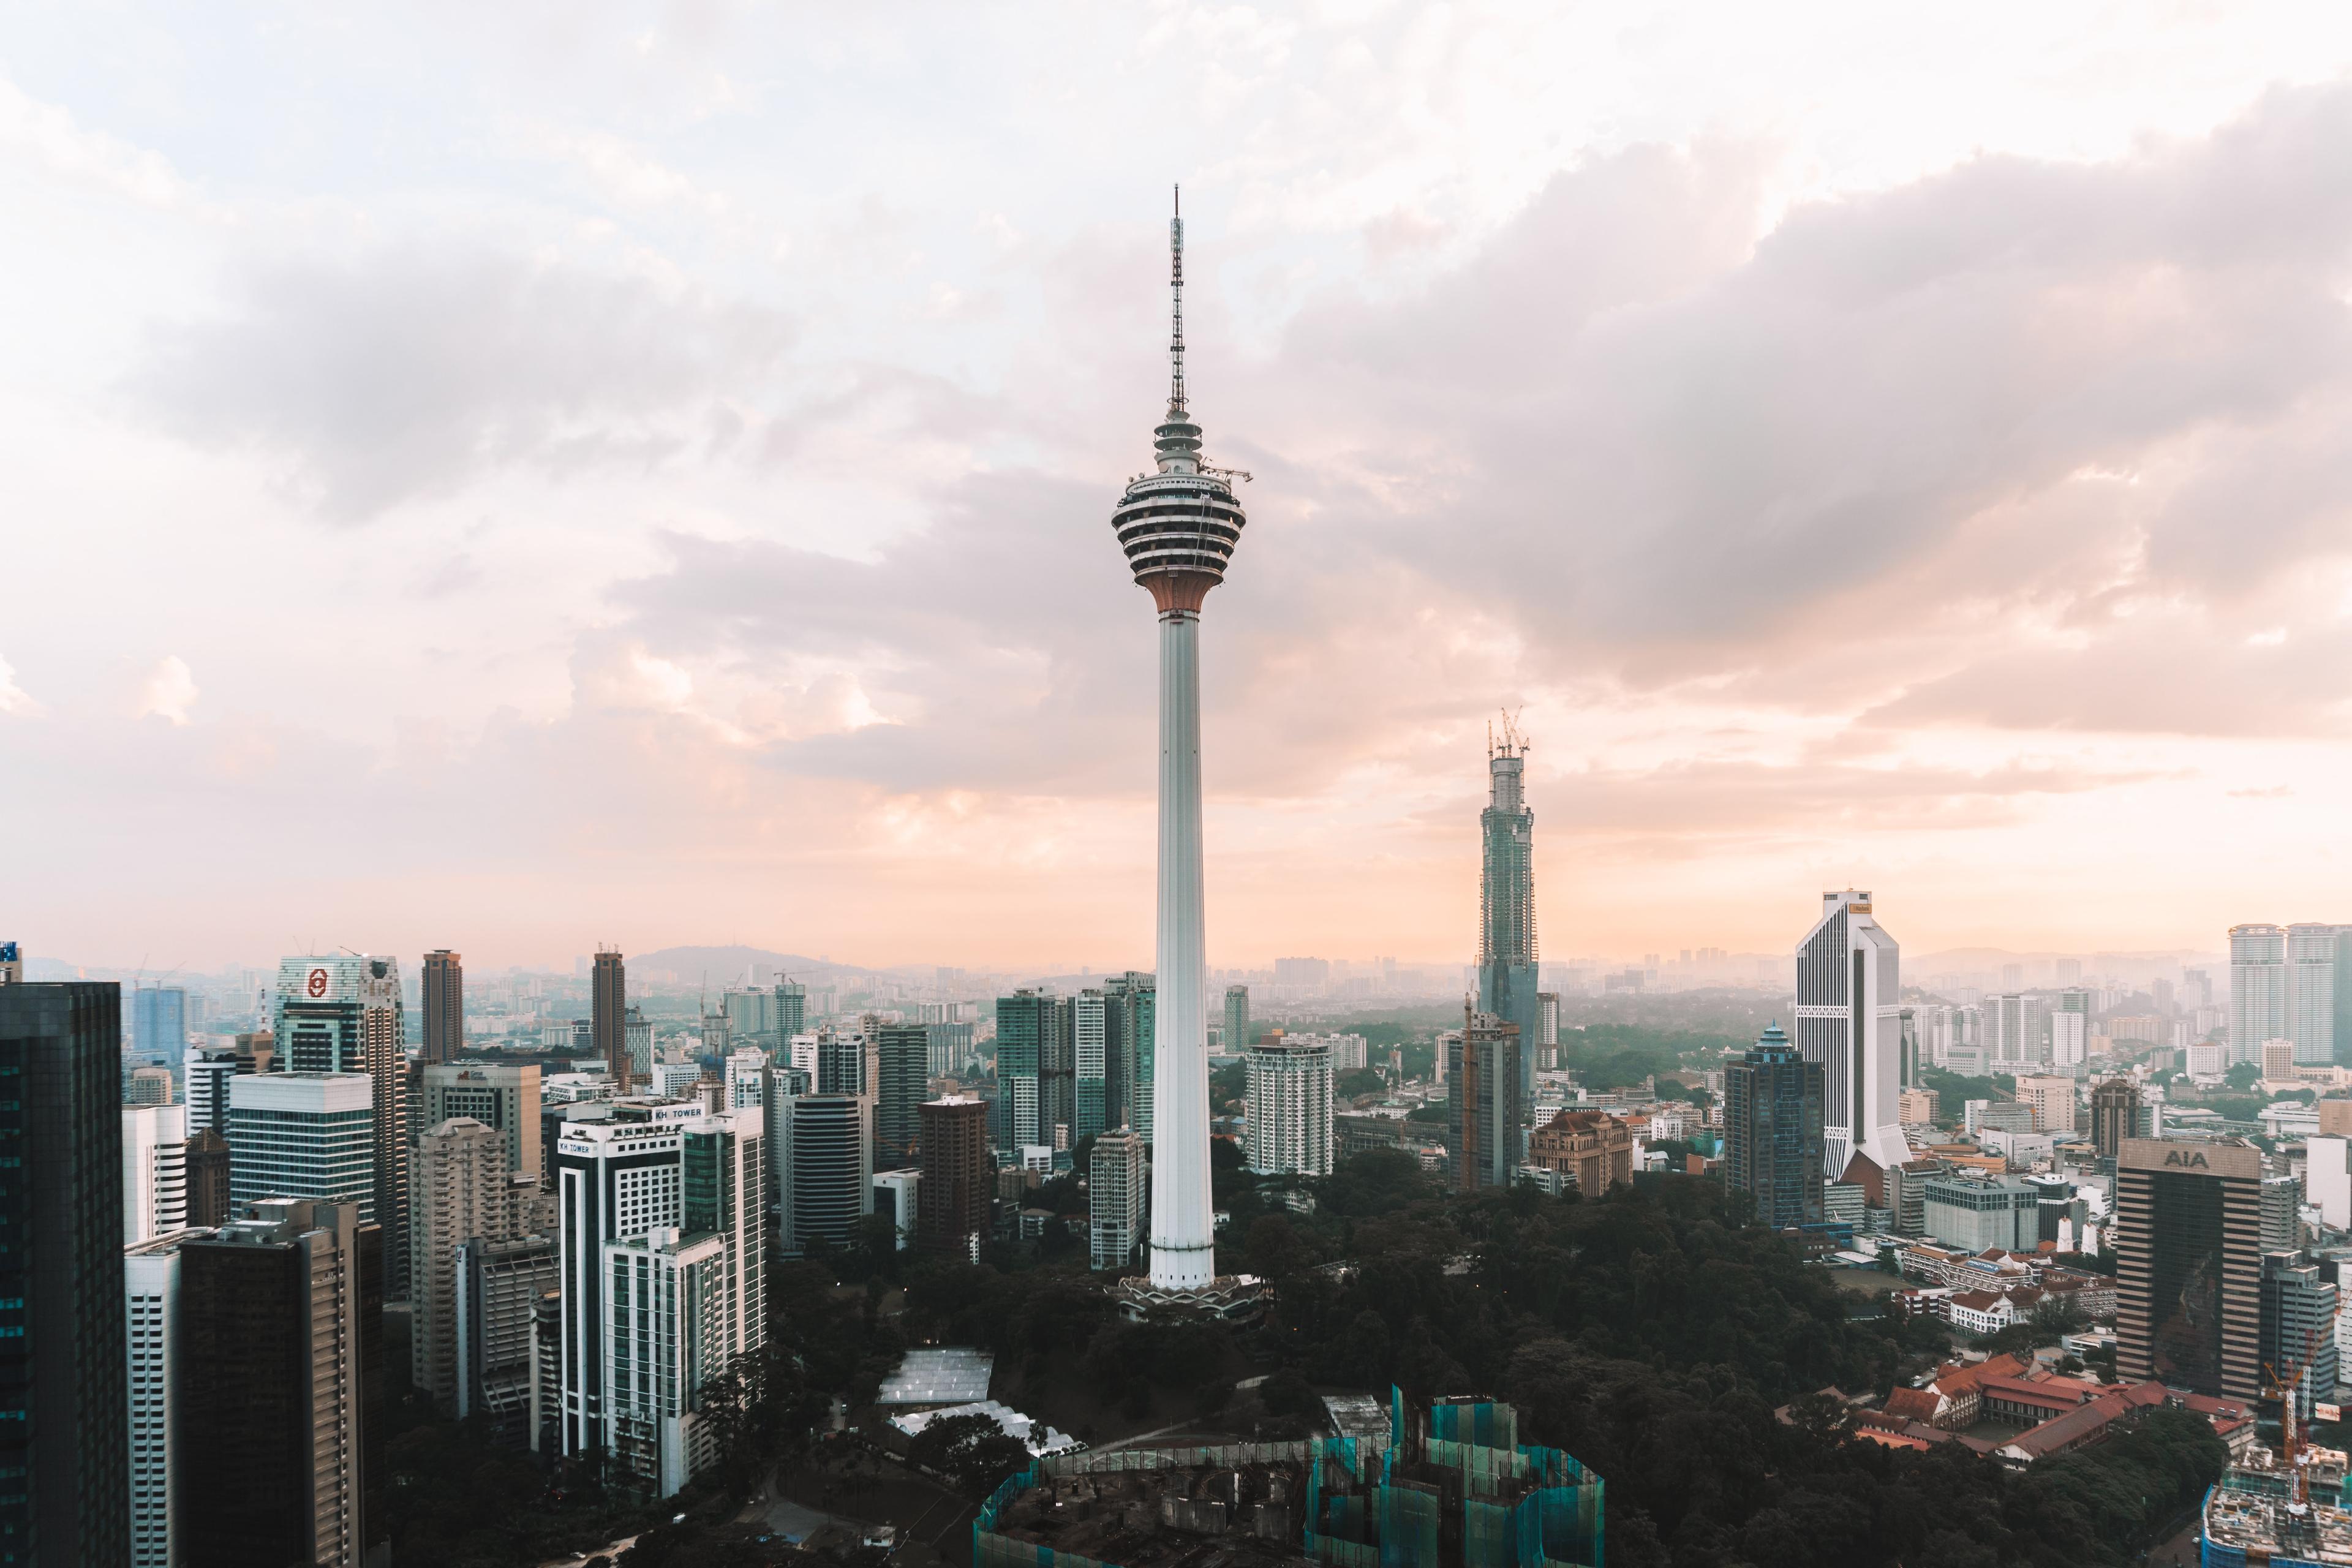 Are you struggling to find an affordable and comfortable room to rent in Kuala Lumpur? Don't let the challenges of the rental market get you down. In this article, we'll show you how to overcome three common hurdles faced by renters in the city. Whether you're looking for more options, better prices, or more responsive landlords, we've got you covered. With our expert tips and advice, you'll be well on your way to finding your dream room in Kuala Lumpur.